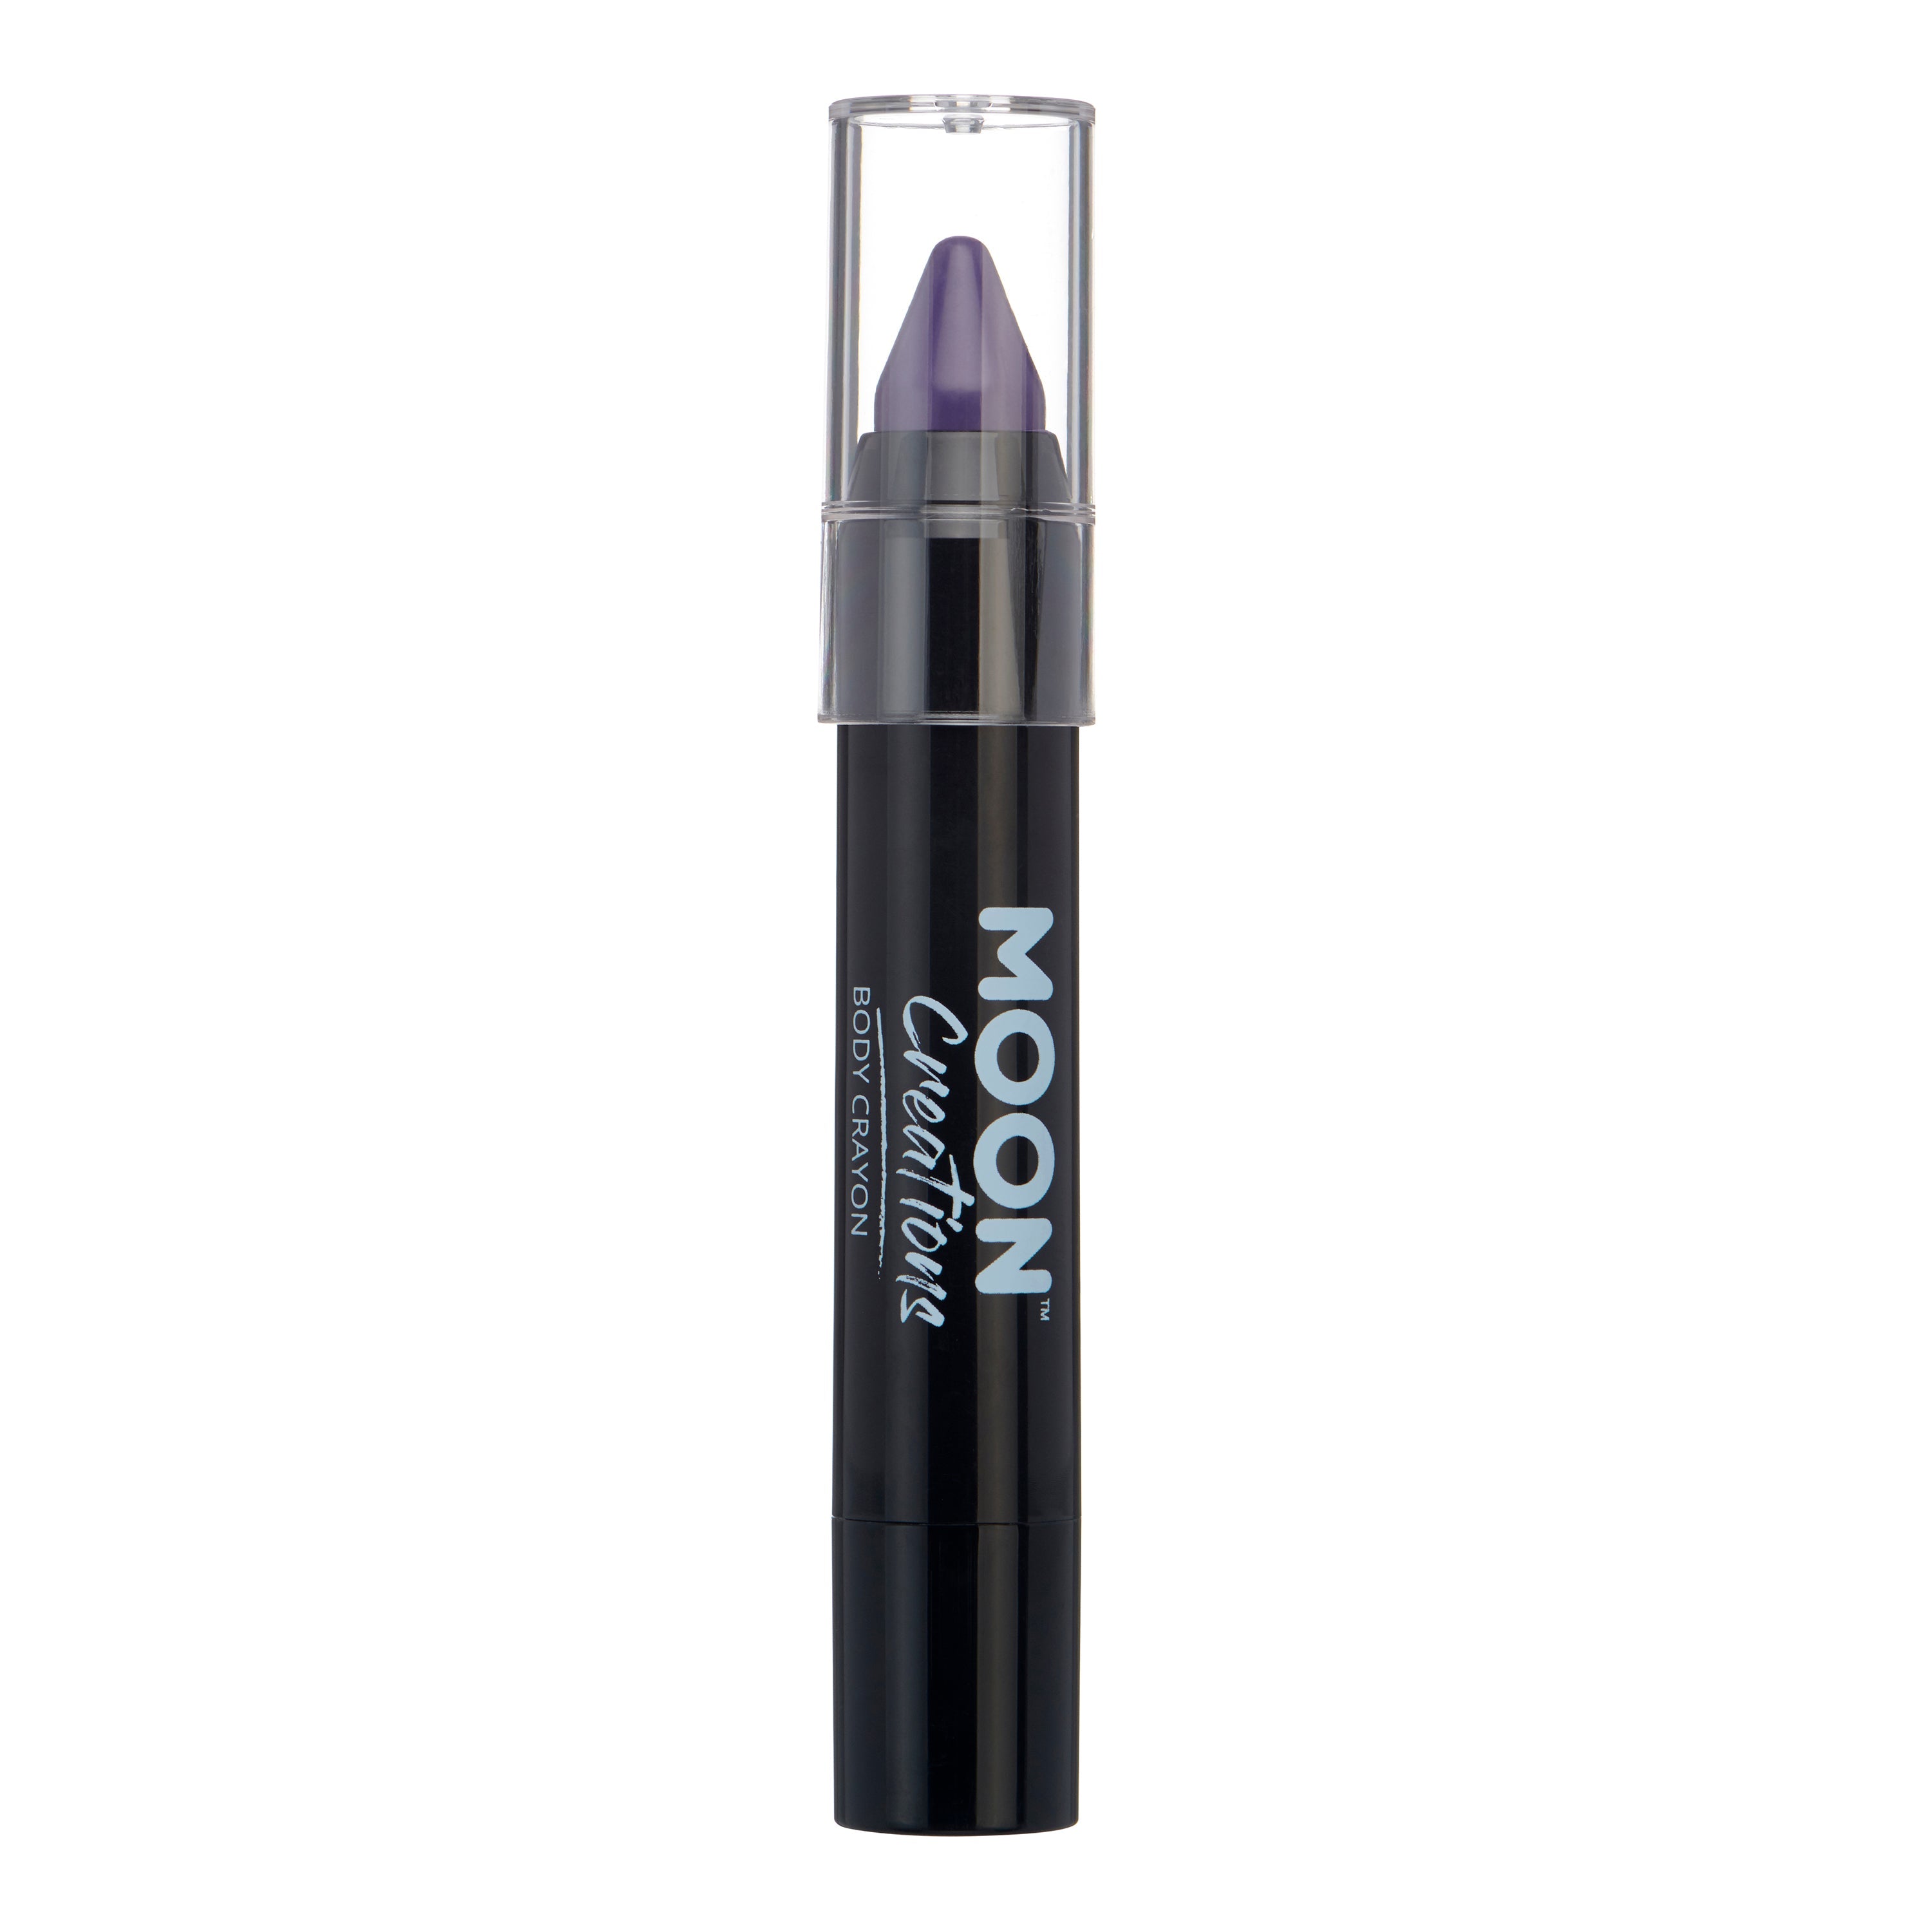 Purple - Face & Body Crayon, 3.5g. Cosmetically certified, FDA & Health Canada compliant and cruelty free.